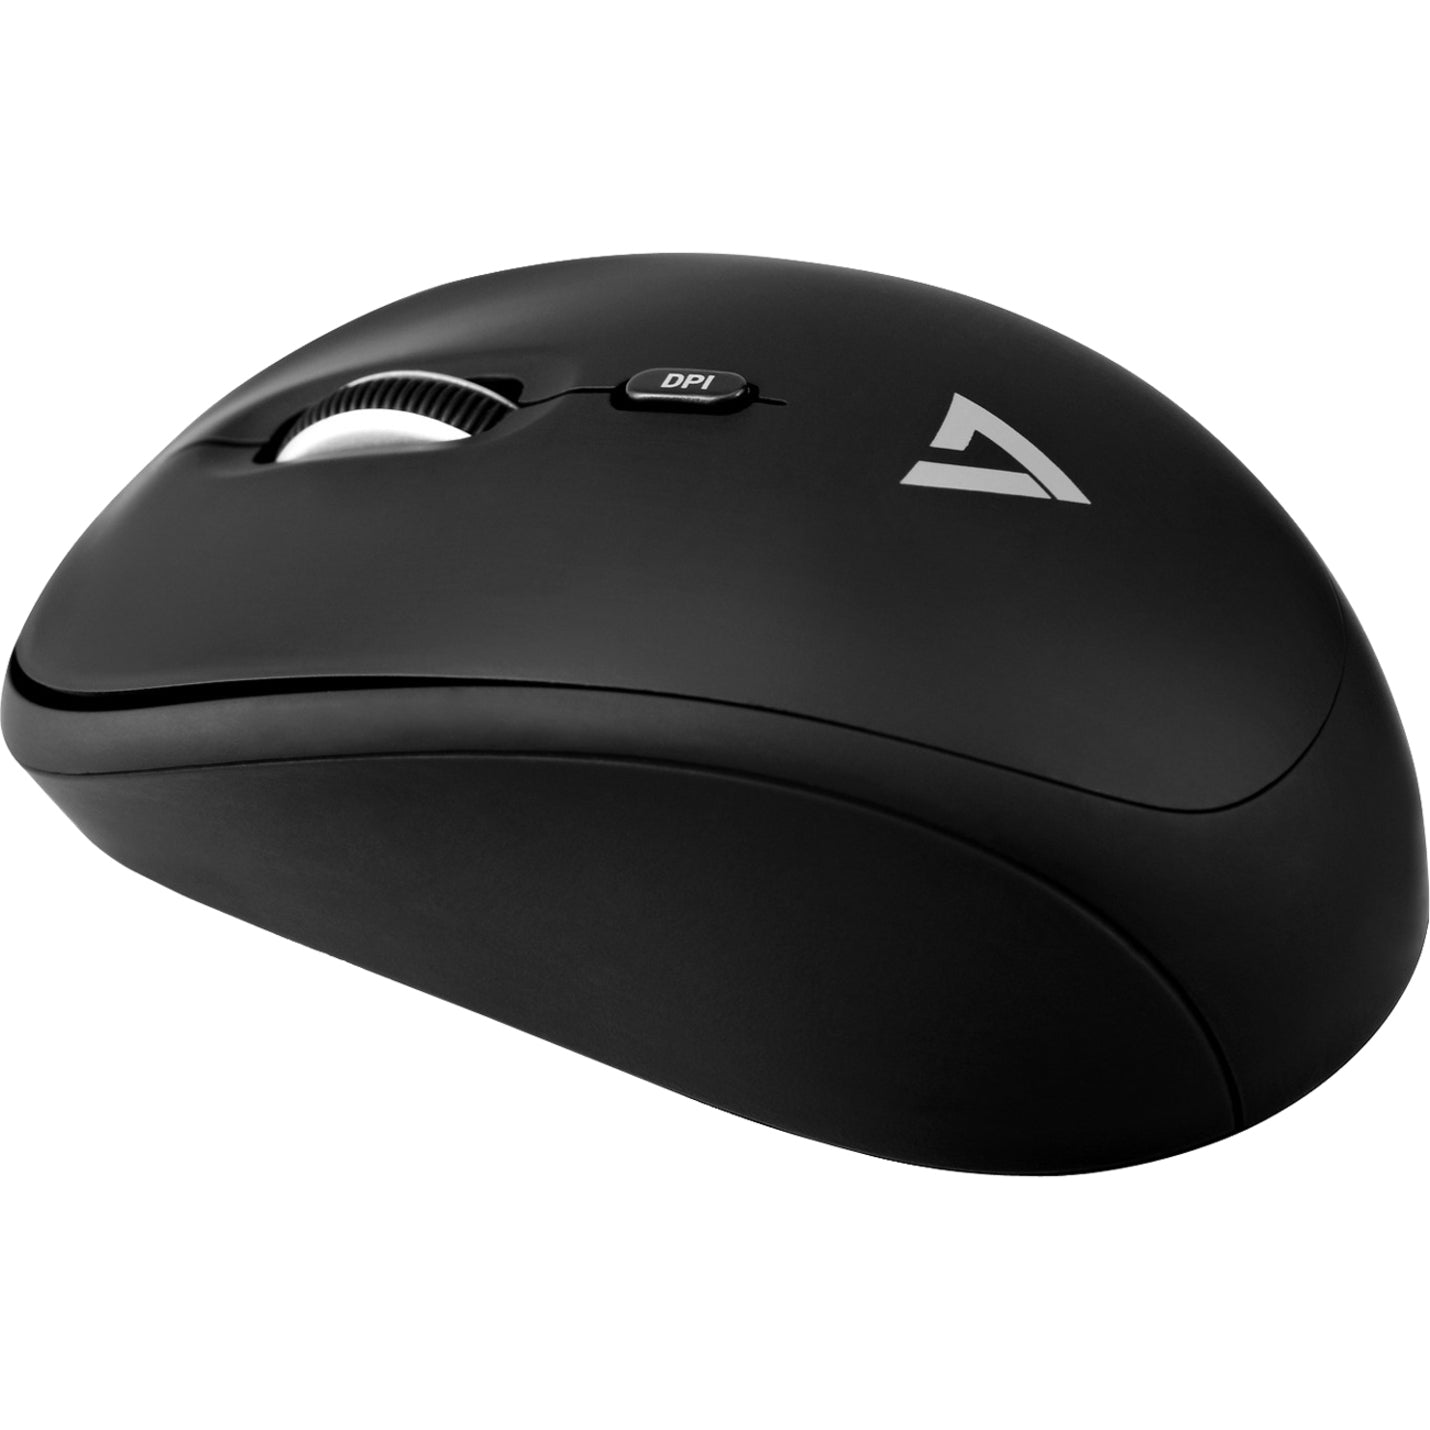 V7 MW100-1N 4-Button Wireless Optical Mouse with Adjustable DPI - Black, Ergonomic Fit, 1600 dpi, 2.4 GHz